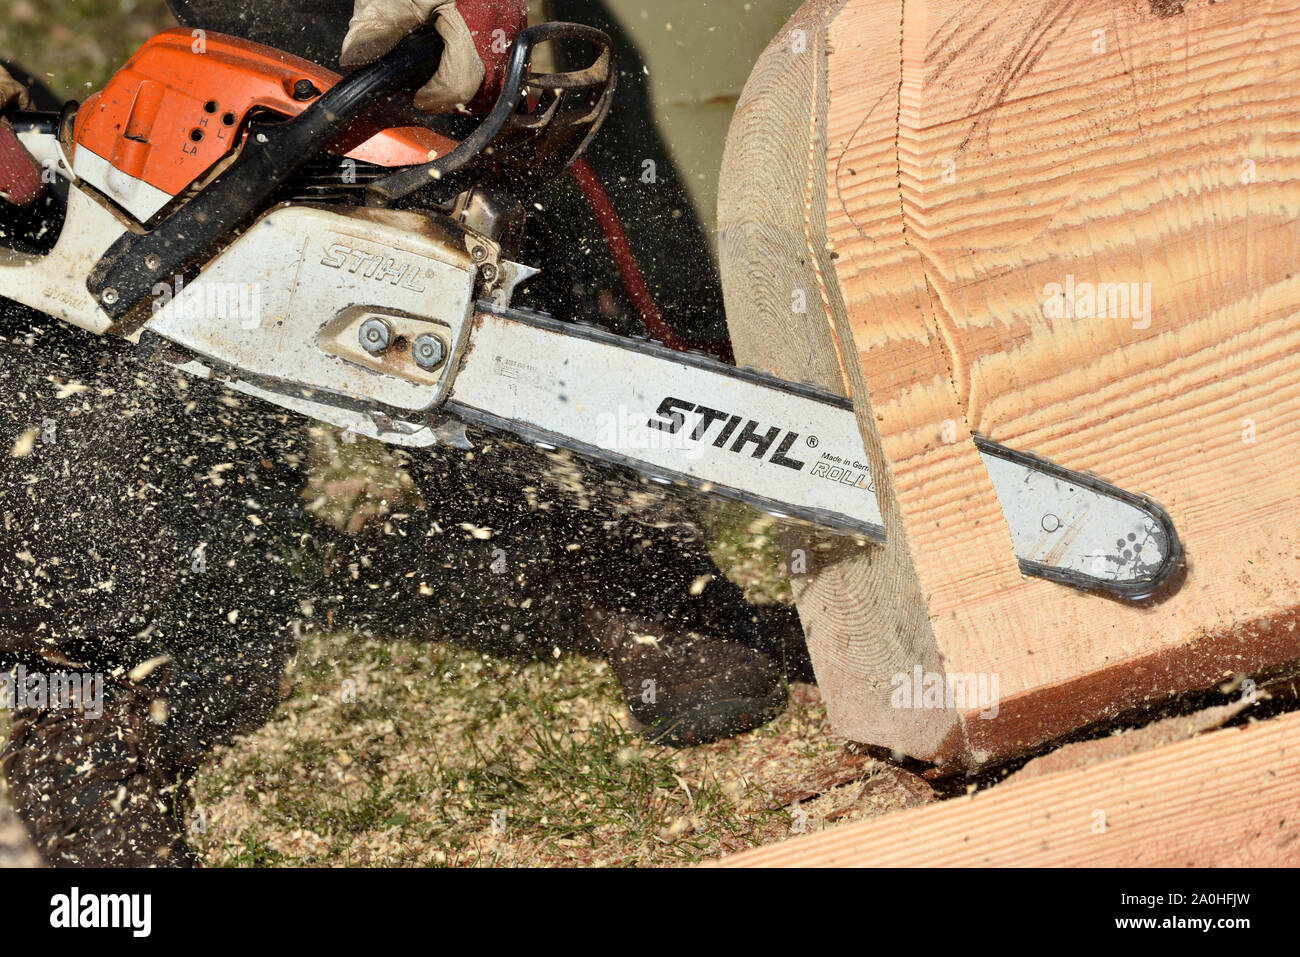 Kaunas, Lithuania - April 04: Stihl chainsaw in Kaunas on April 04, 2019.  Stihl is a German manufacturer of chainsaws and other handheld power  equipme Stock Photo - Alamy